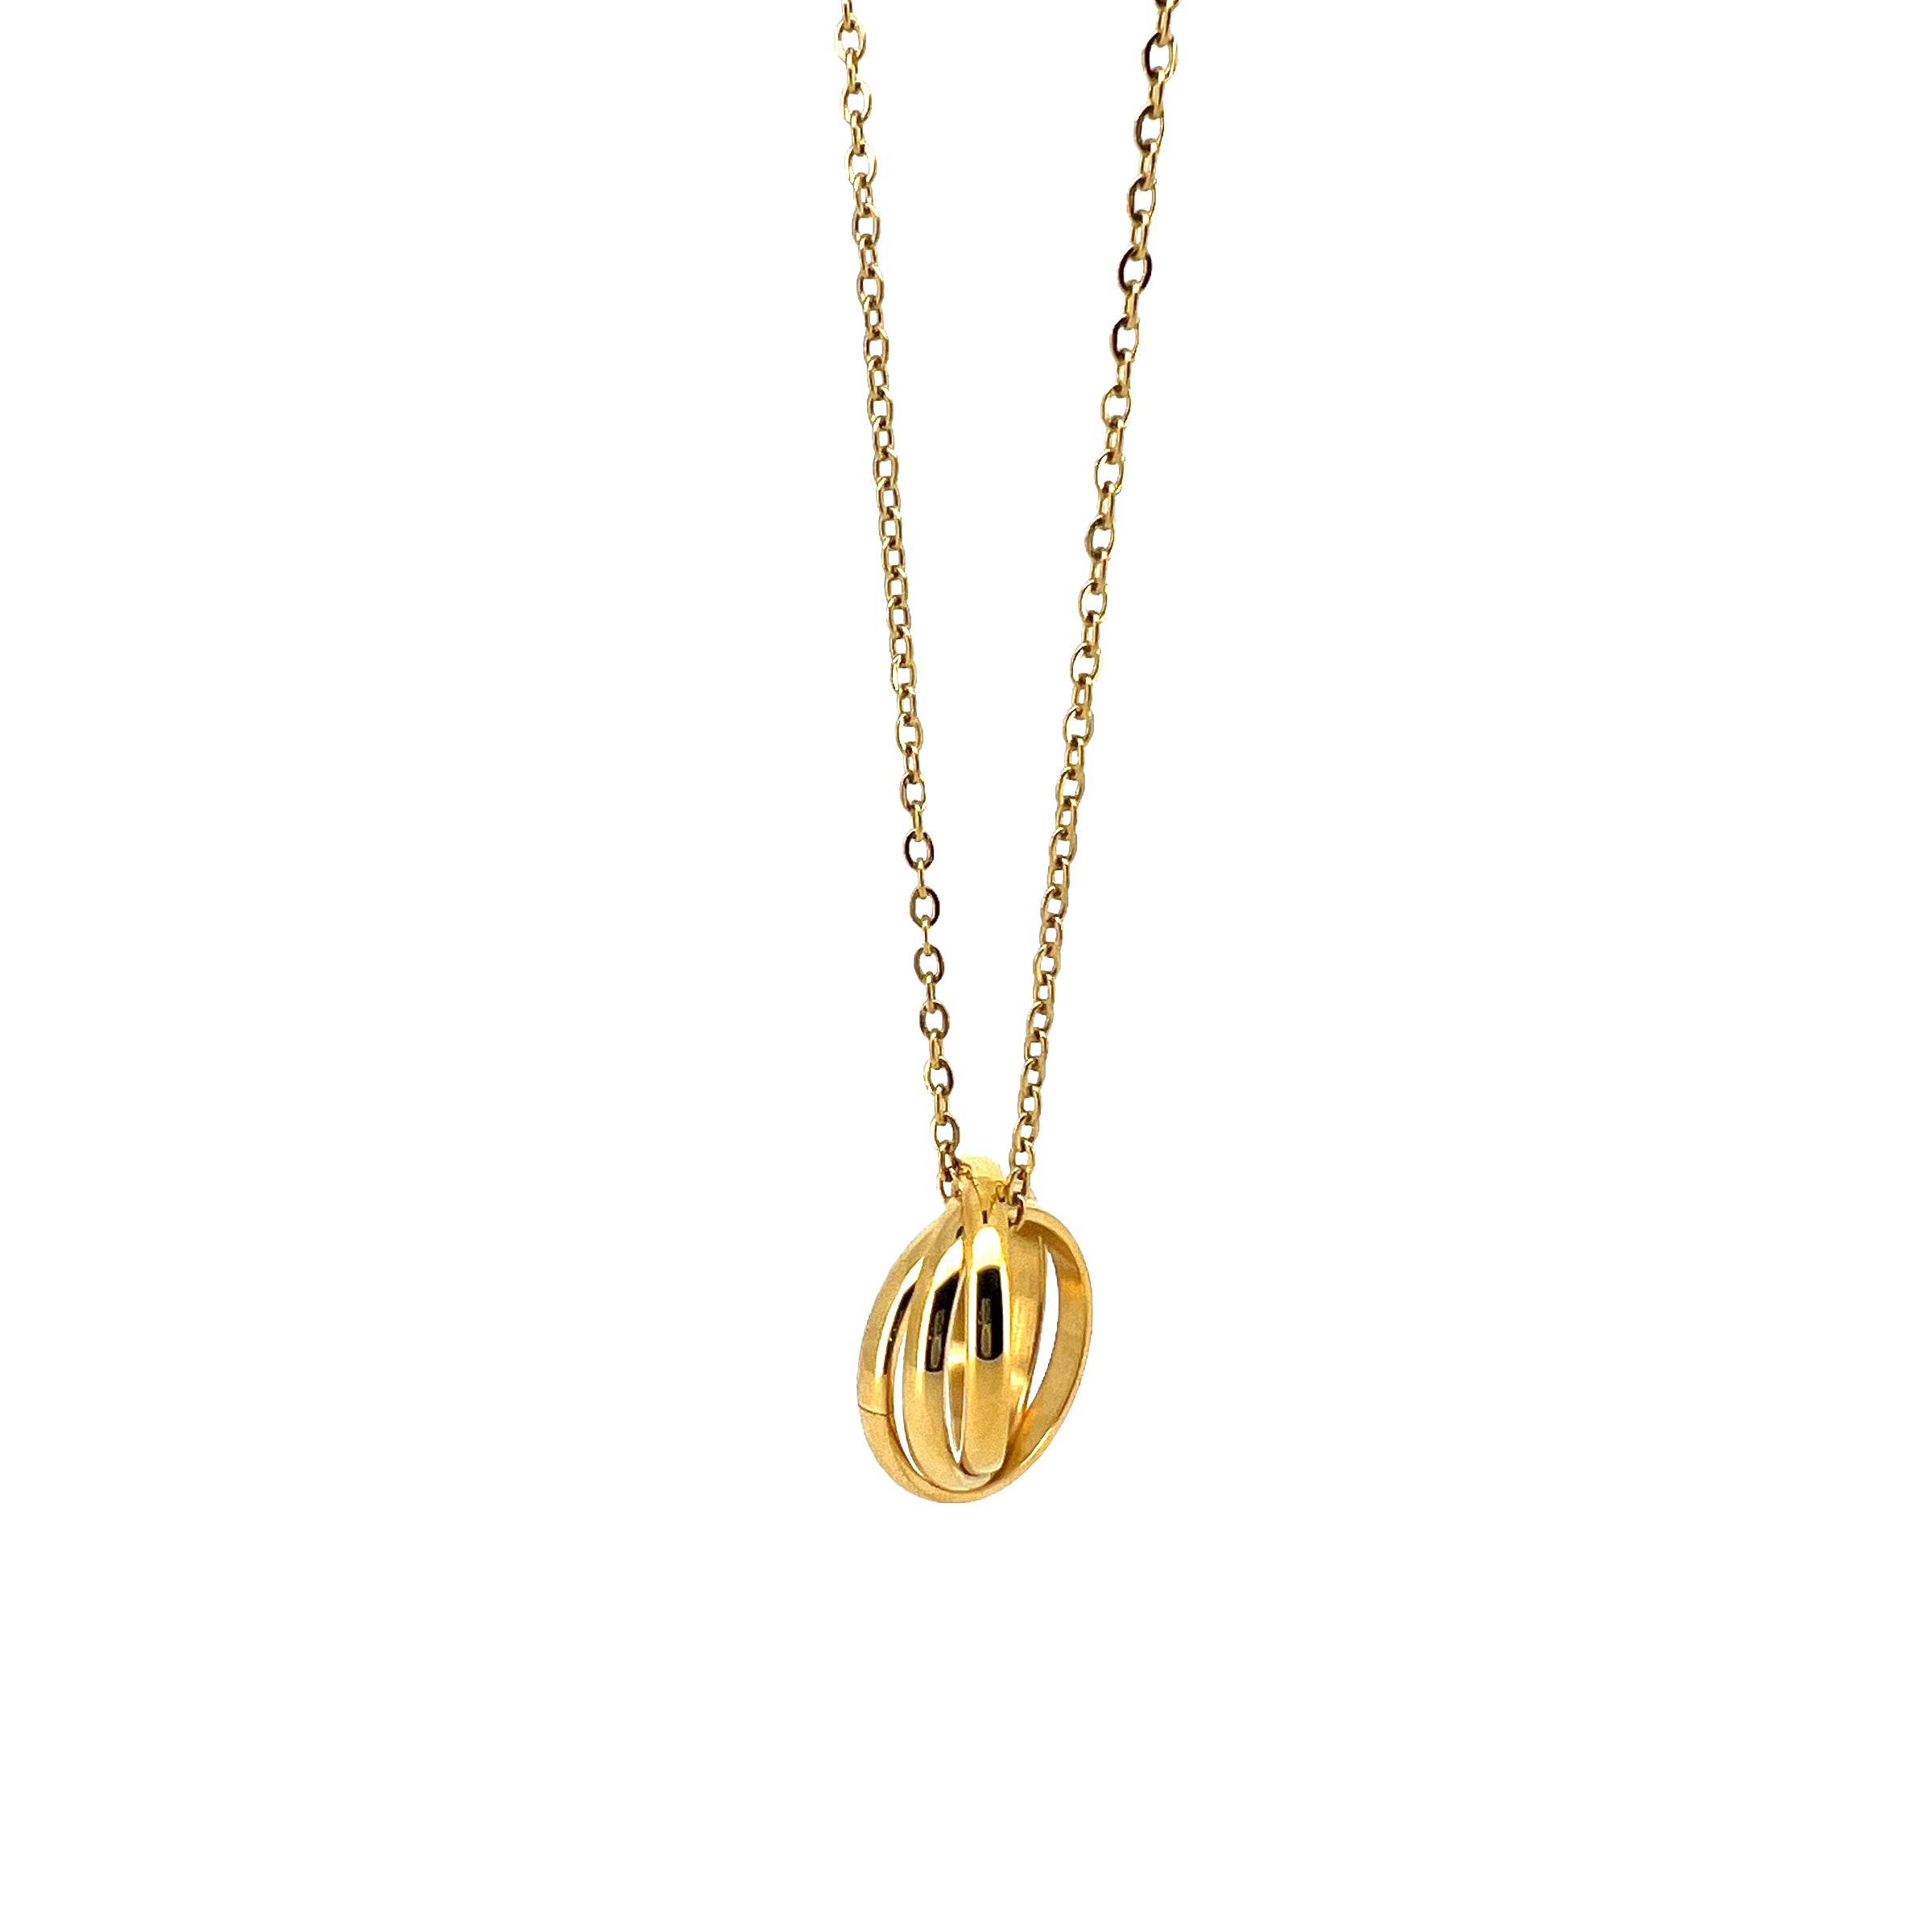 Latham Stainless Steel Necklace with Interlock Pendant